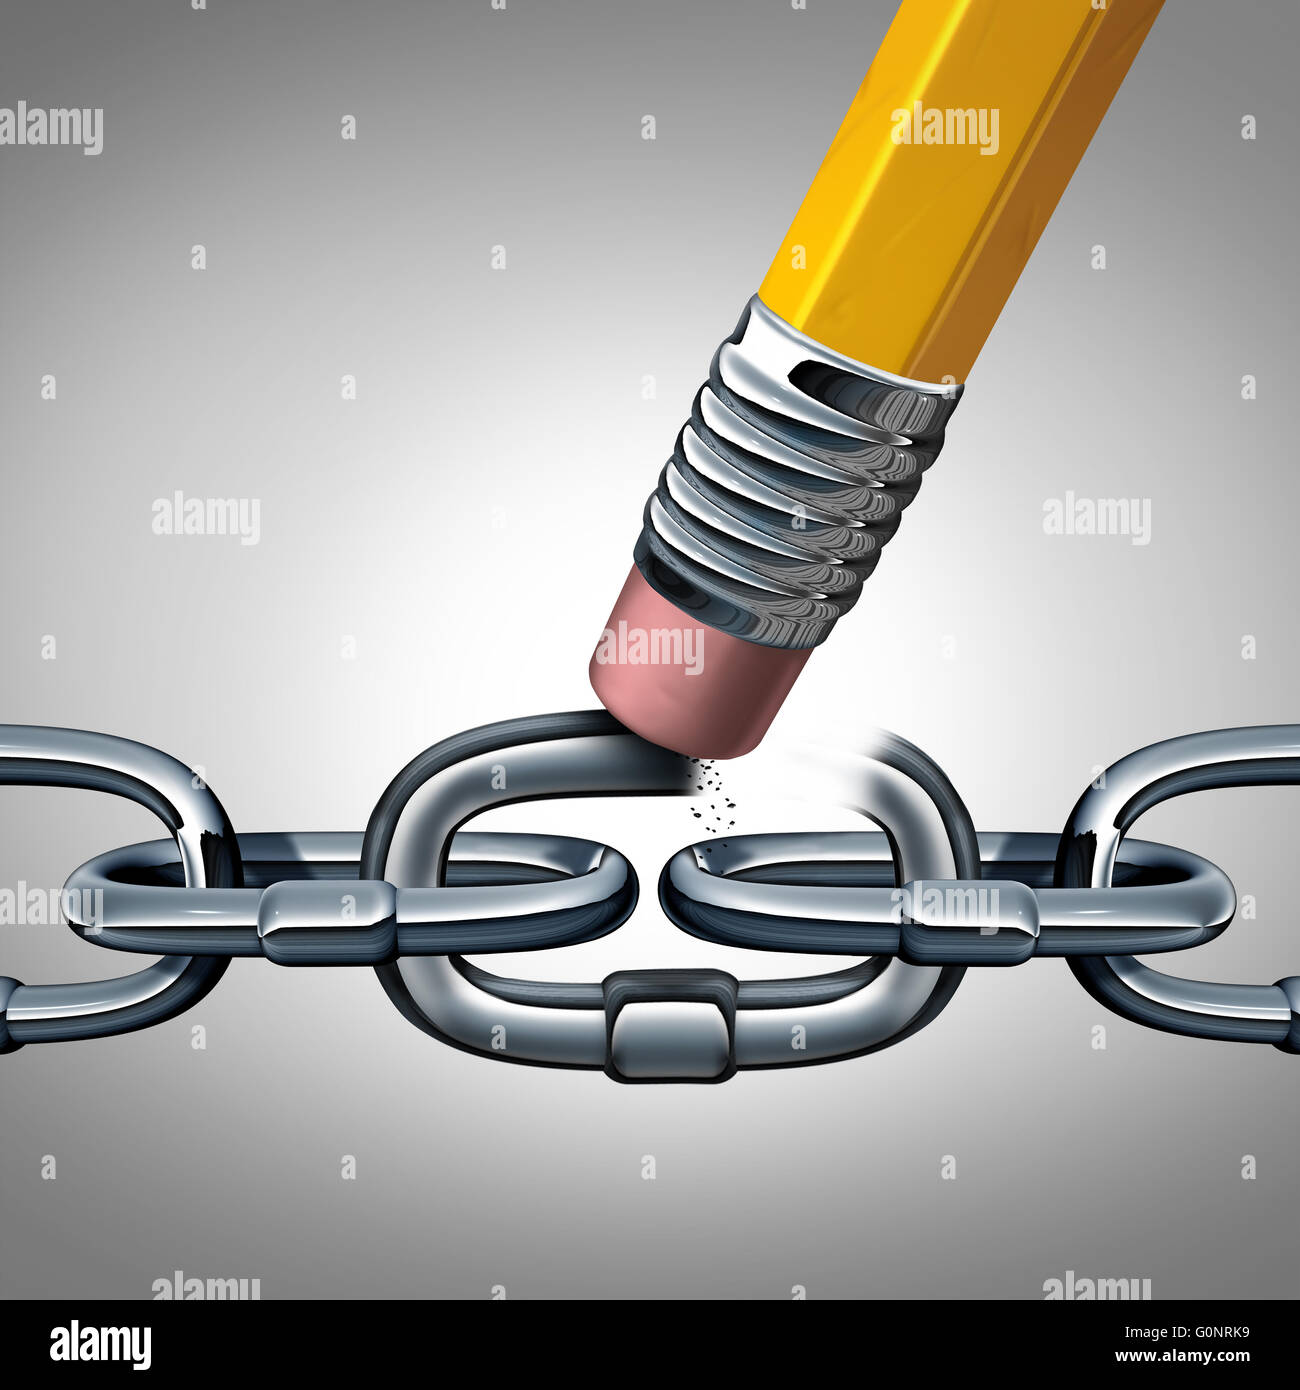 Concept of weakness and broken chain as a business symbol with metal links and a pencil eraser erasing a key connection as a metaphor for disconnecting or divorce with 3D Illustration elements. Stock Photo